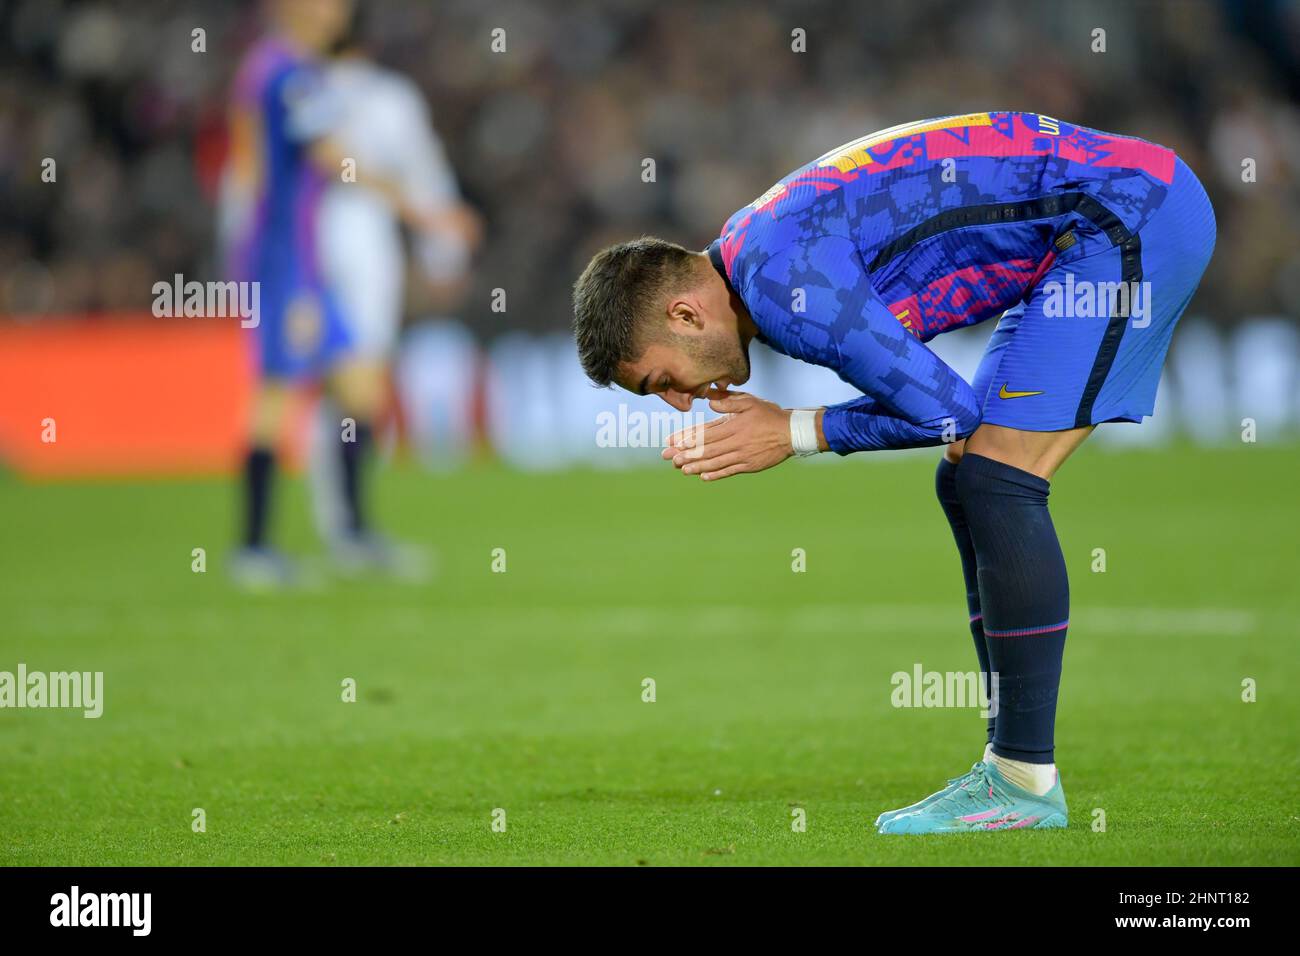 Barcelona,Spain.17 February,2022.  Ferran Torres (19) of FC Barcelona during the Europa League match between FC Barcelona and SSC Napoli at Camp Nou Stadium. Credit: rosdemora/Alamy Live News Stock Photo